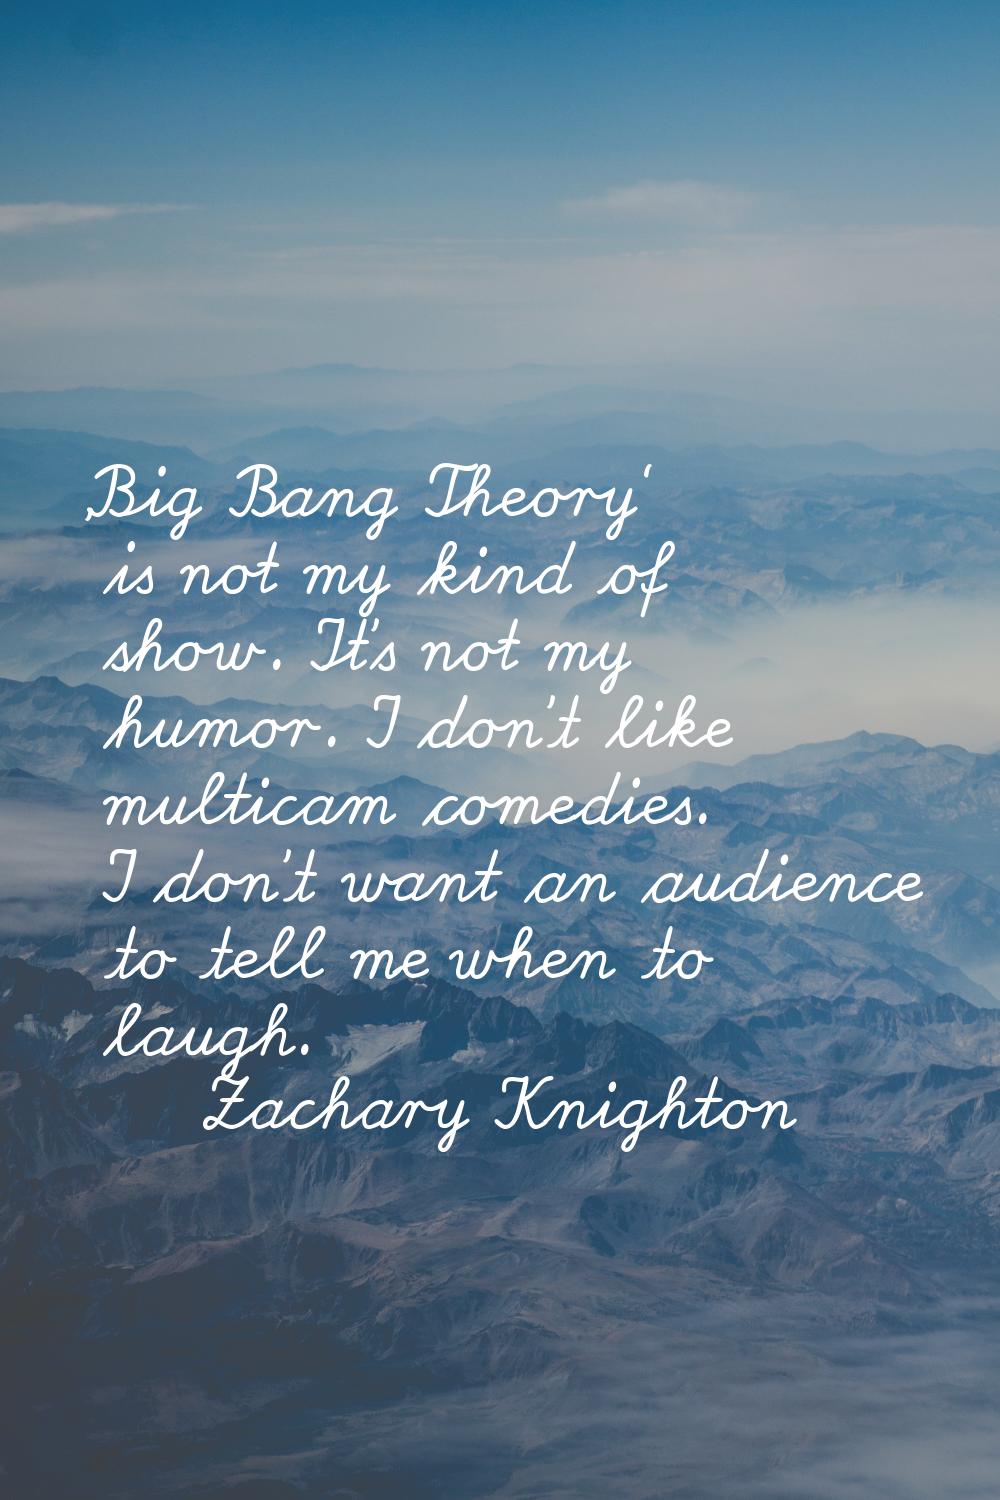 'Big Bang Theory' is not my kind of show. It's not my humor. I don't like multicam comedies. I don'